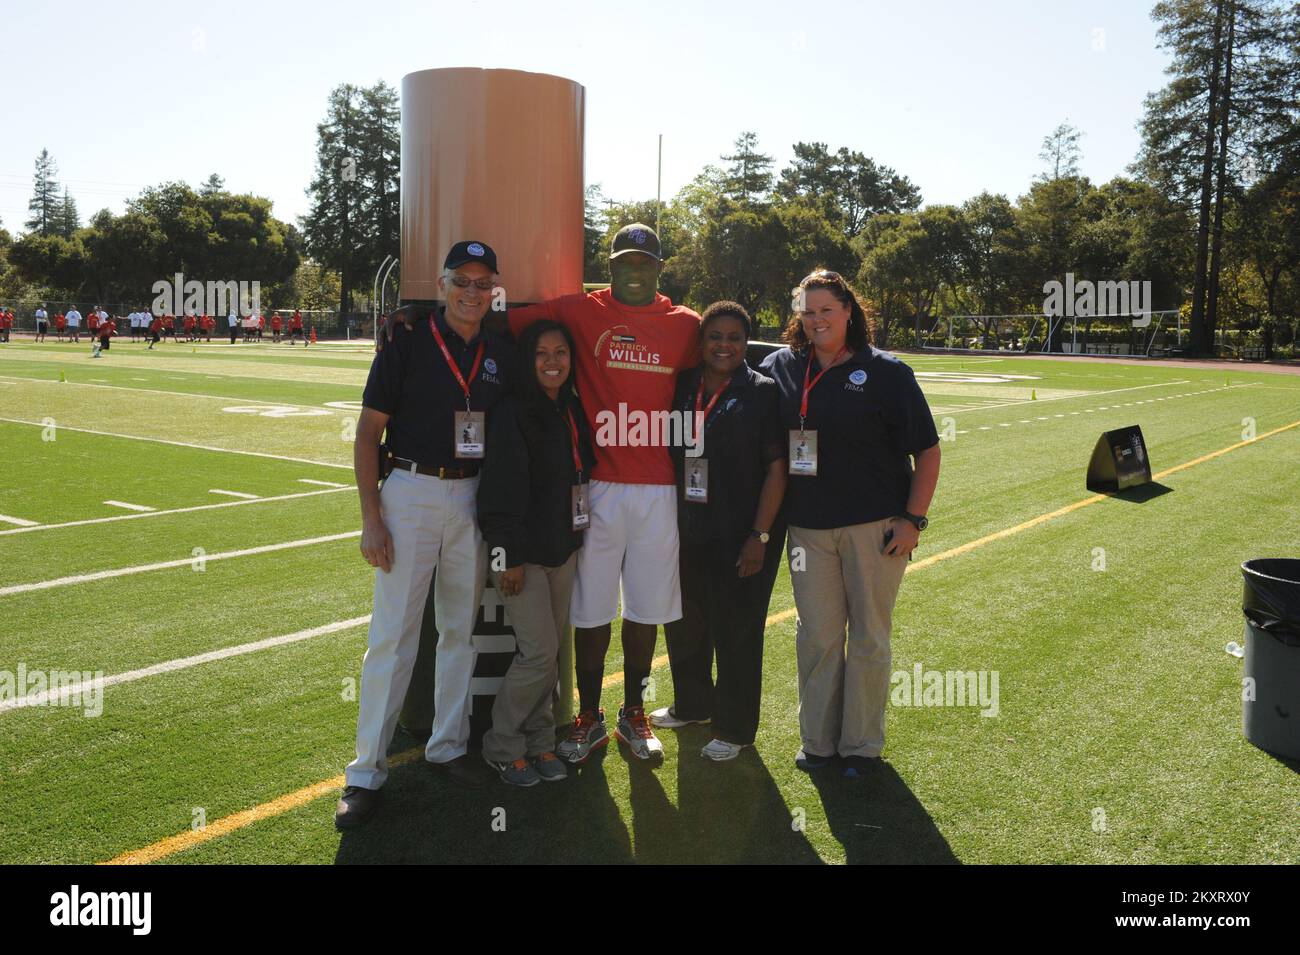 Palo Alto, Calif., June 9, 2012   Professional football player Patrick Willis with FEMA Region 9 Farley Howell, Angela Nak, Kelly Hudson, and Heather Duschell at the Duracell Patrick Willis Youth Pro-Camp.. Photographs Relating to Disasters and Emergency Management Programs, Activities, and Officials Stock Photo